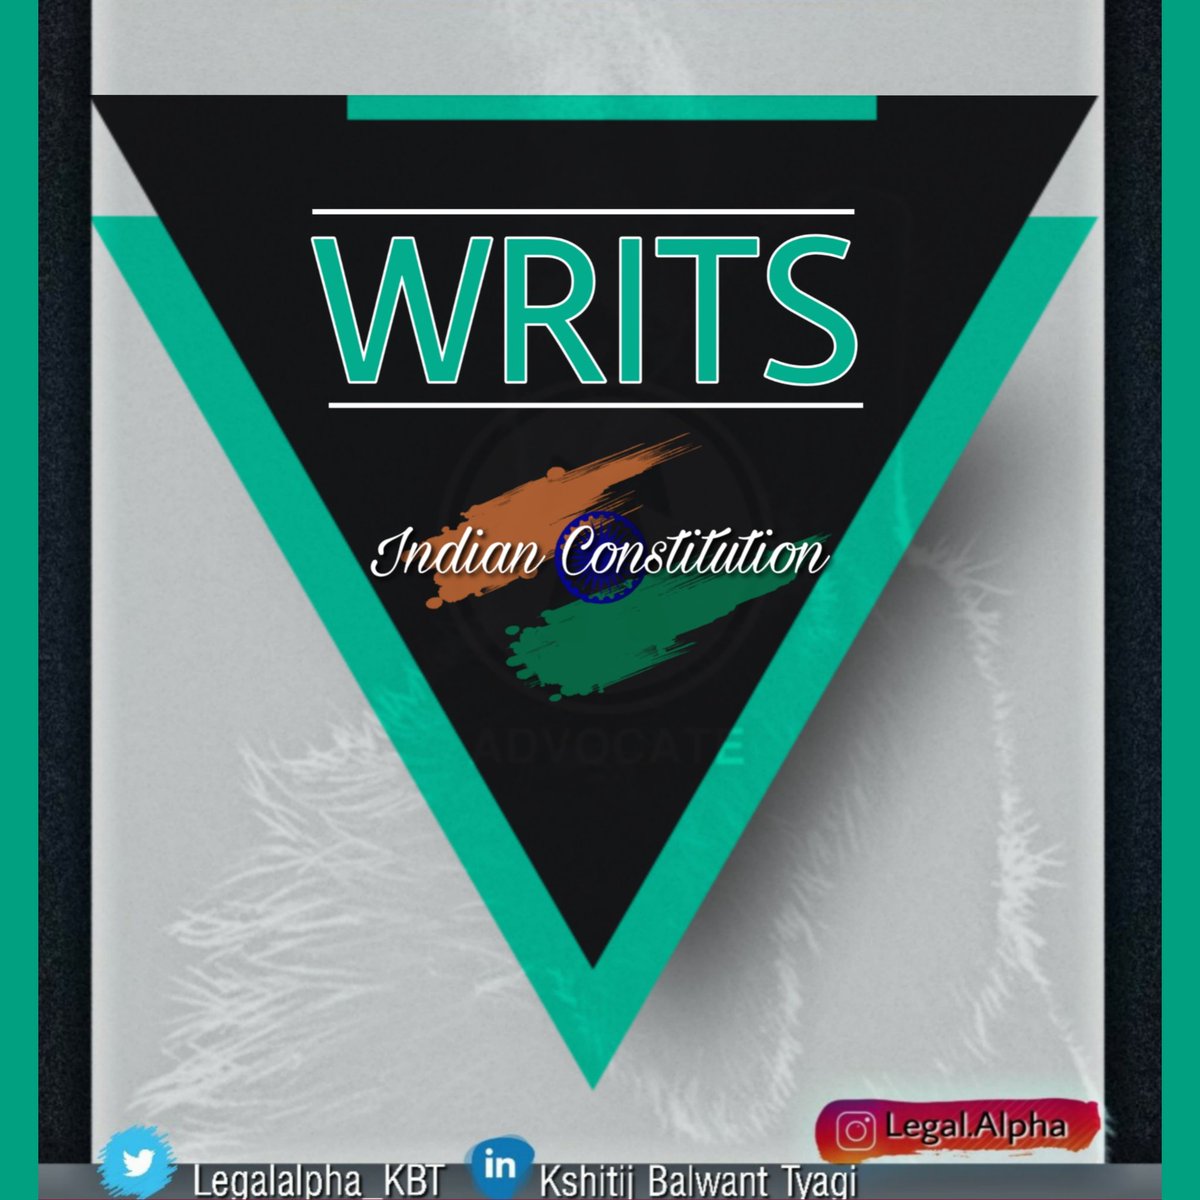 WRITS UNDER PART-3 OF  #Indian  #Constitution WRITS UNDER PART-3 OF  #Indian  #Constitution  #Share  #TrendingNow  #SundayThoughts  #knowledgeCentre  #know  #your  #Rights  #legalteen  #Repost  #RETWEEETME  #moretoexplore  #Explore  #Modi  #GoBeyondBoundaries  #lawyers  #LawAndOrder  #lawschool